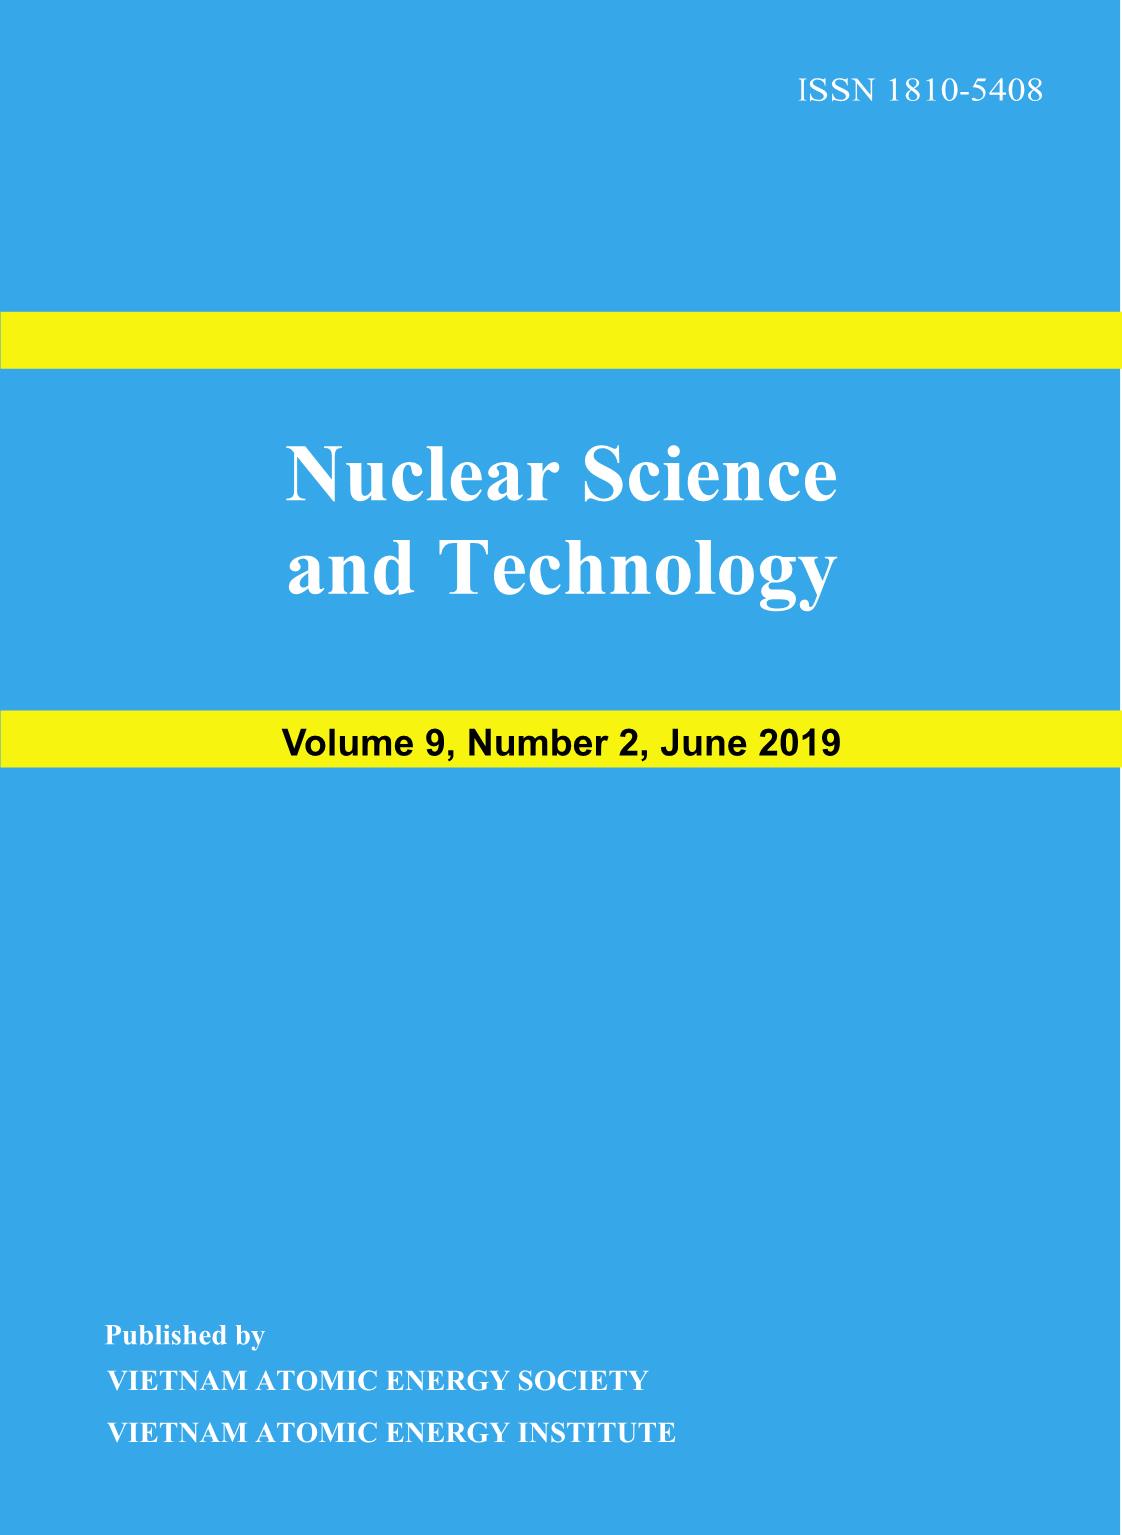 Nuclear Science and Technology - Volume 9, Number 2, June 2019 trang 1